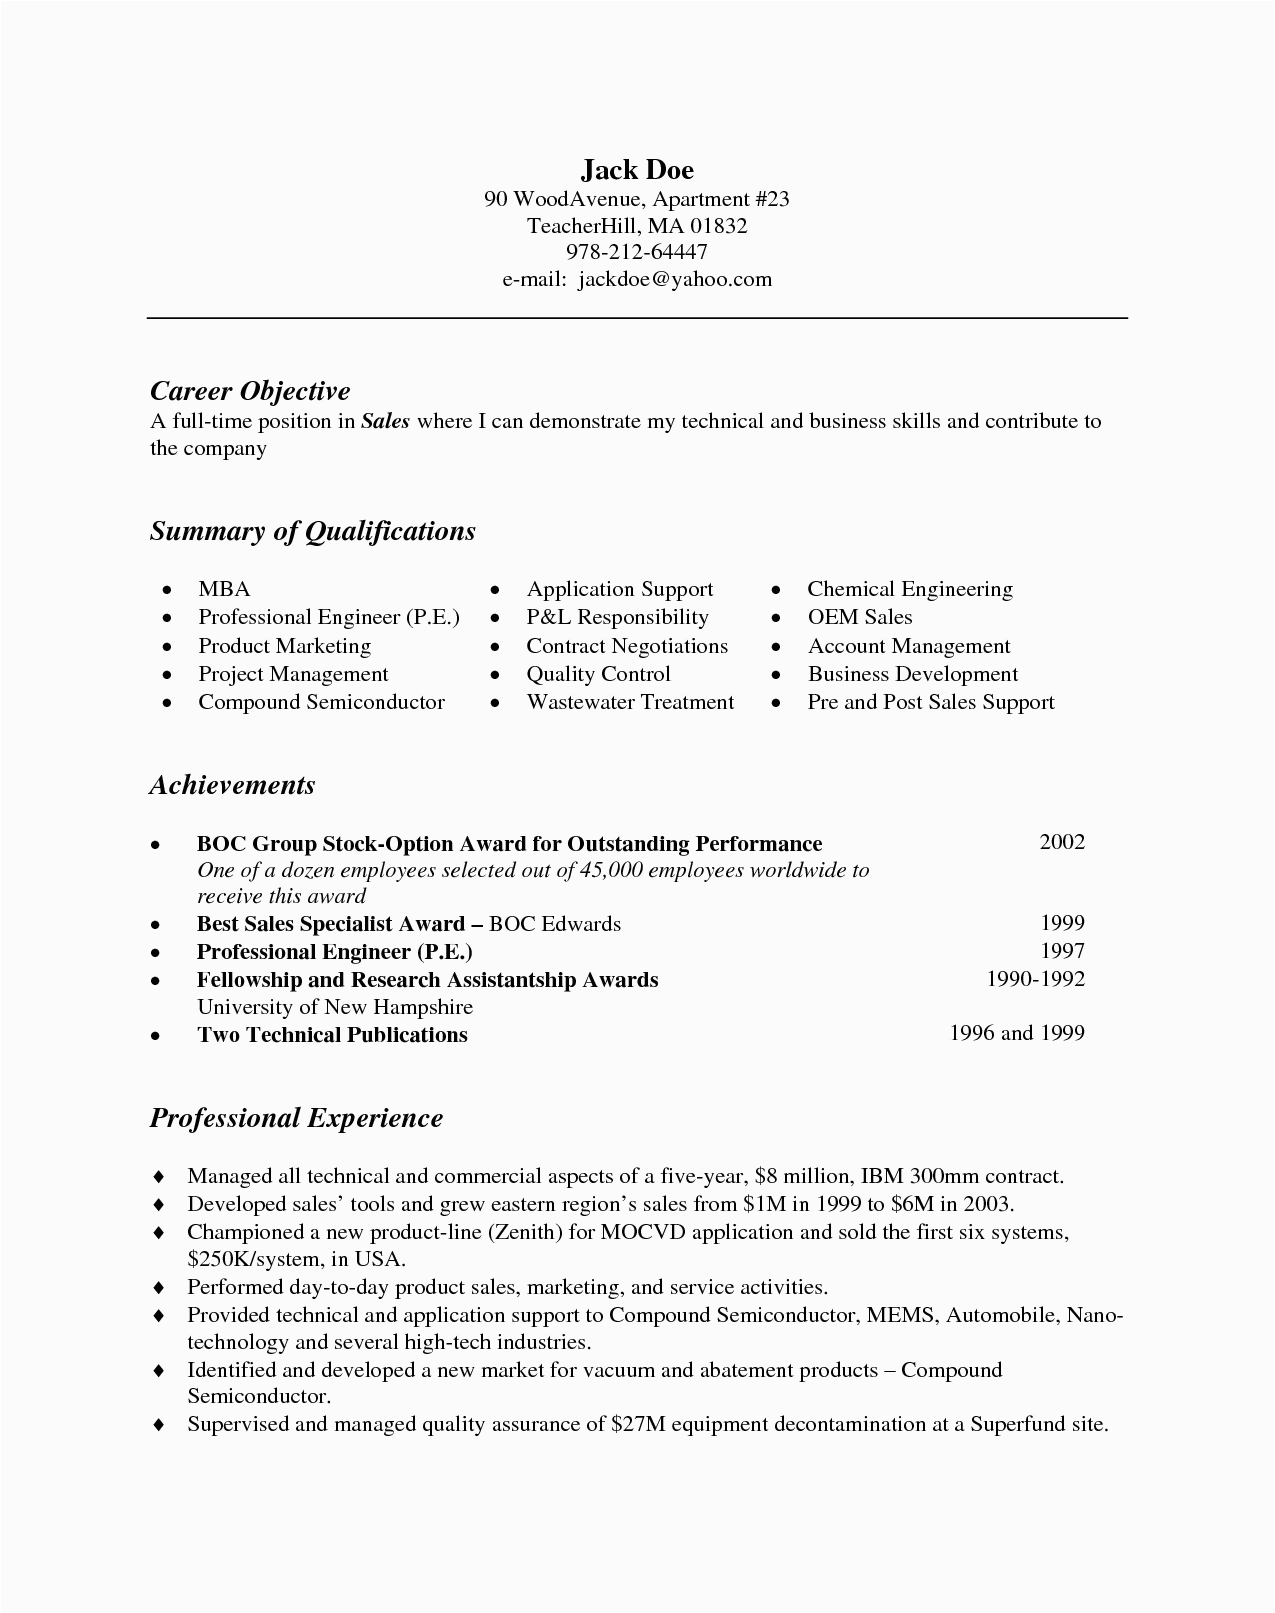 Free Resume Templates with Bullet Points Resume format Bullet Points Bullet format Points